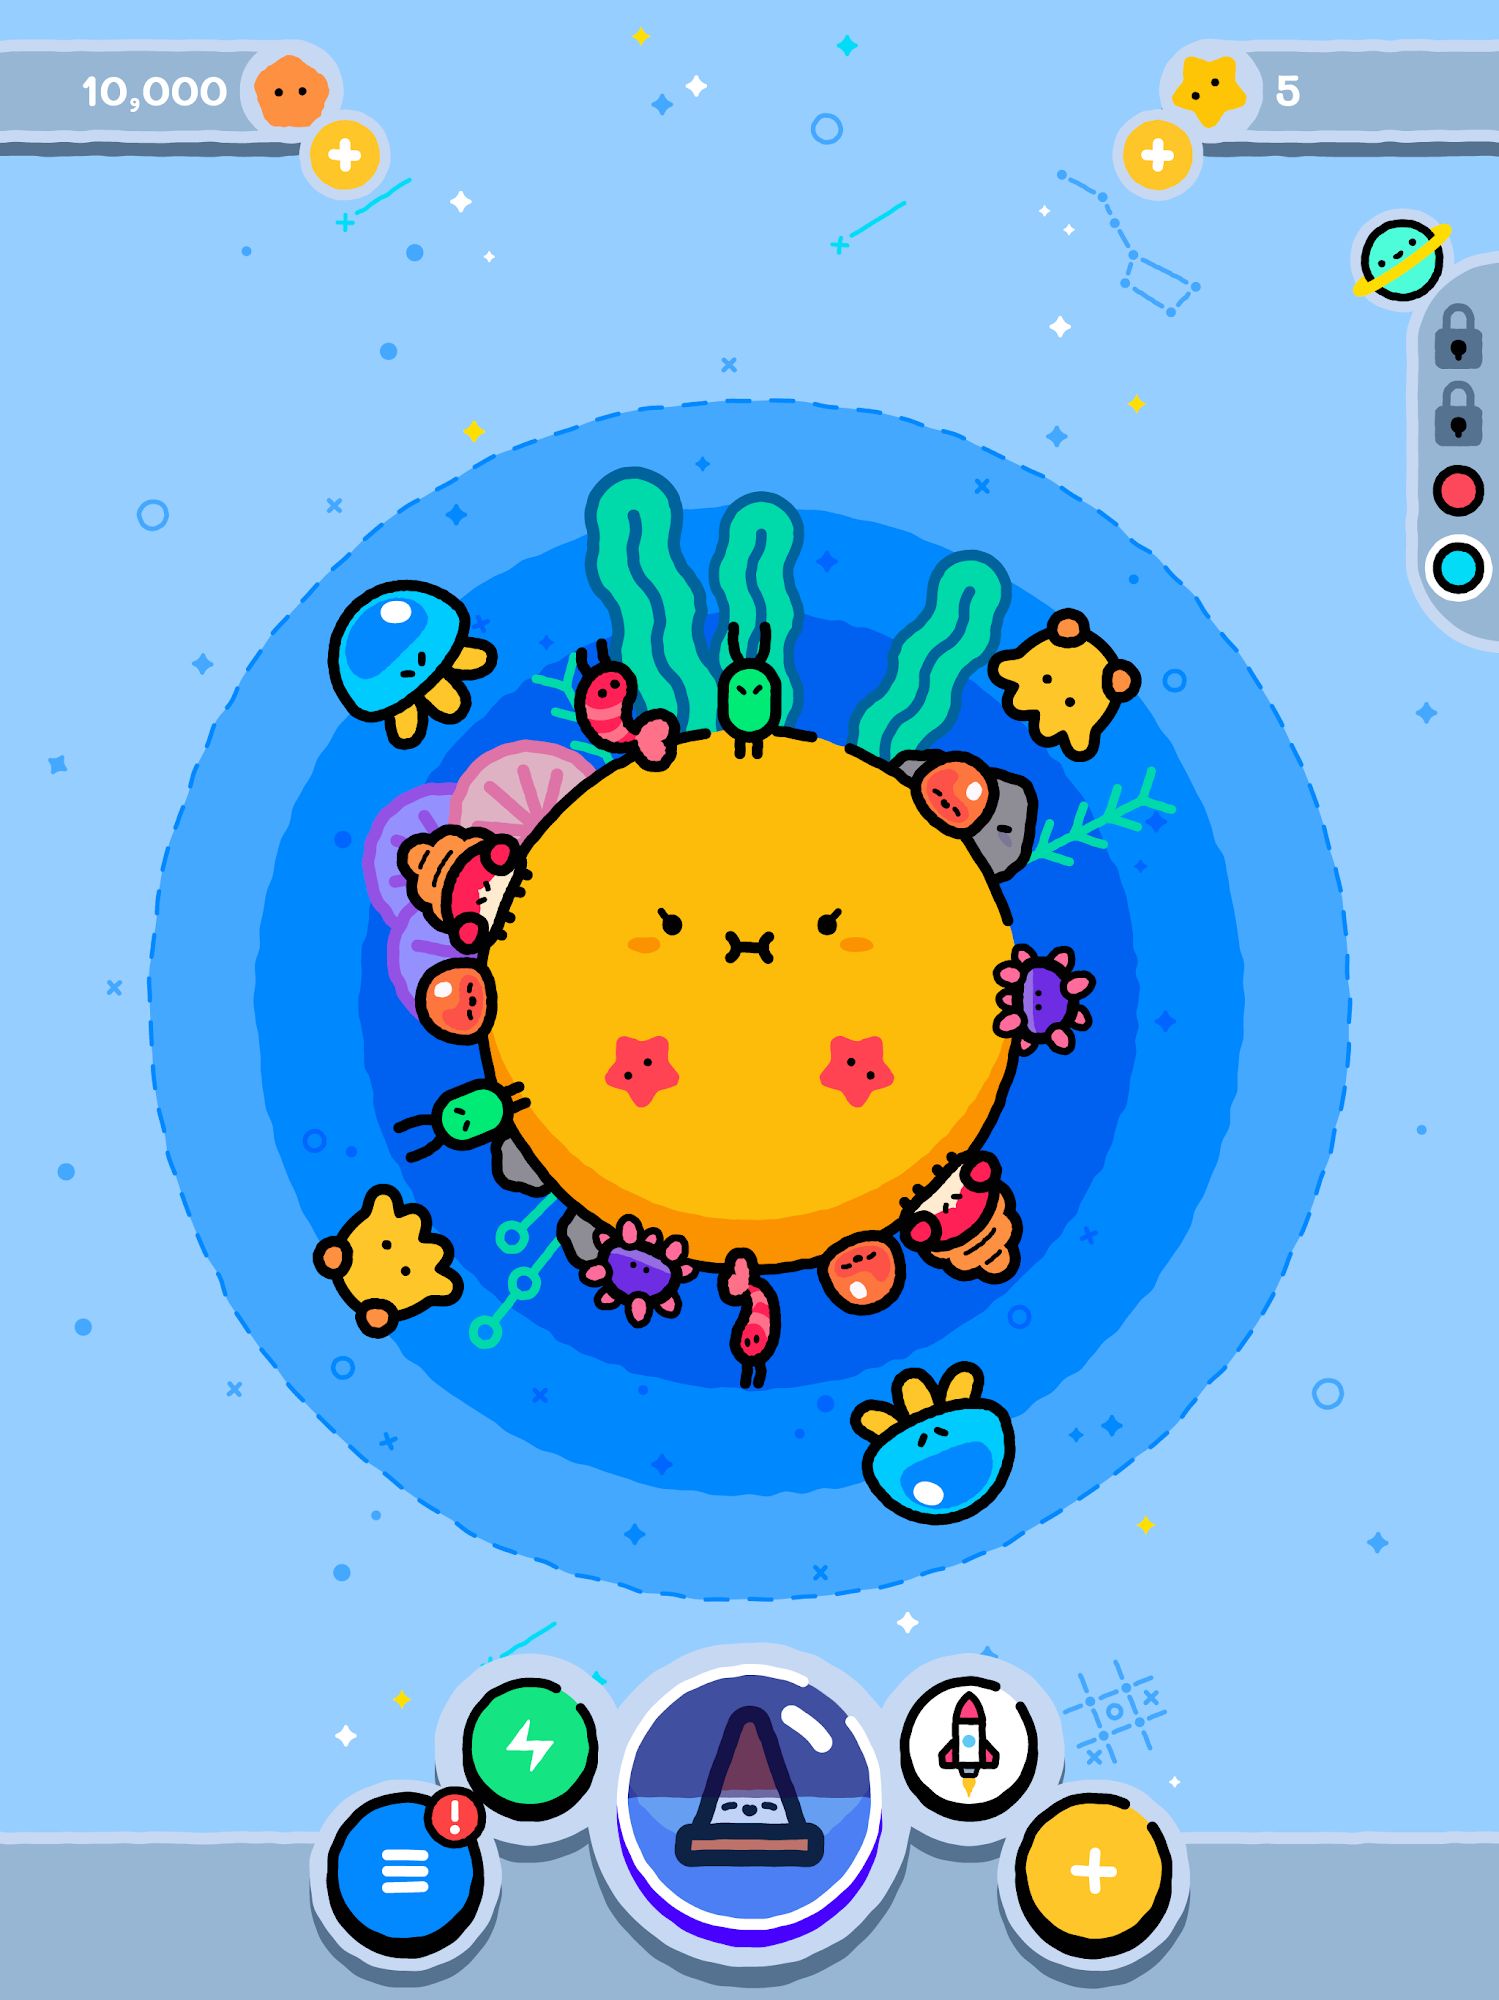 Idle Pocket Planet - Android game screenshots.